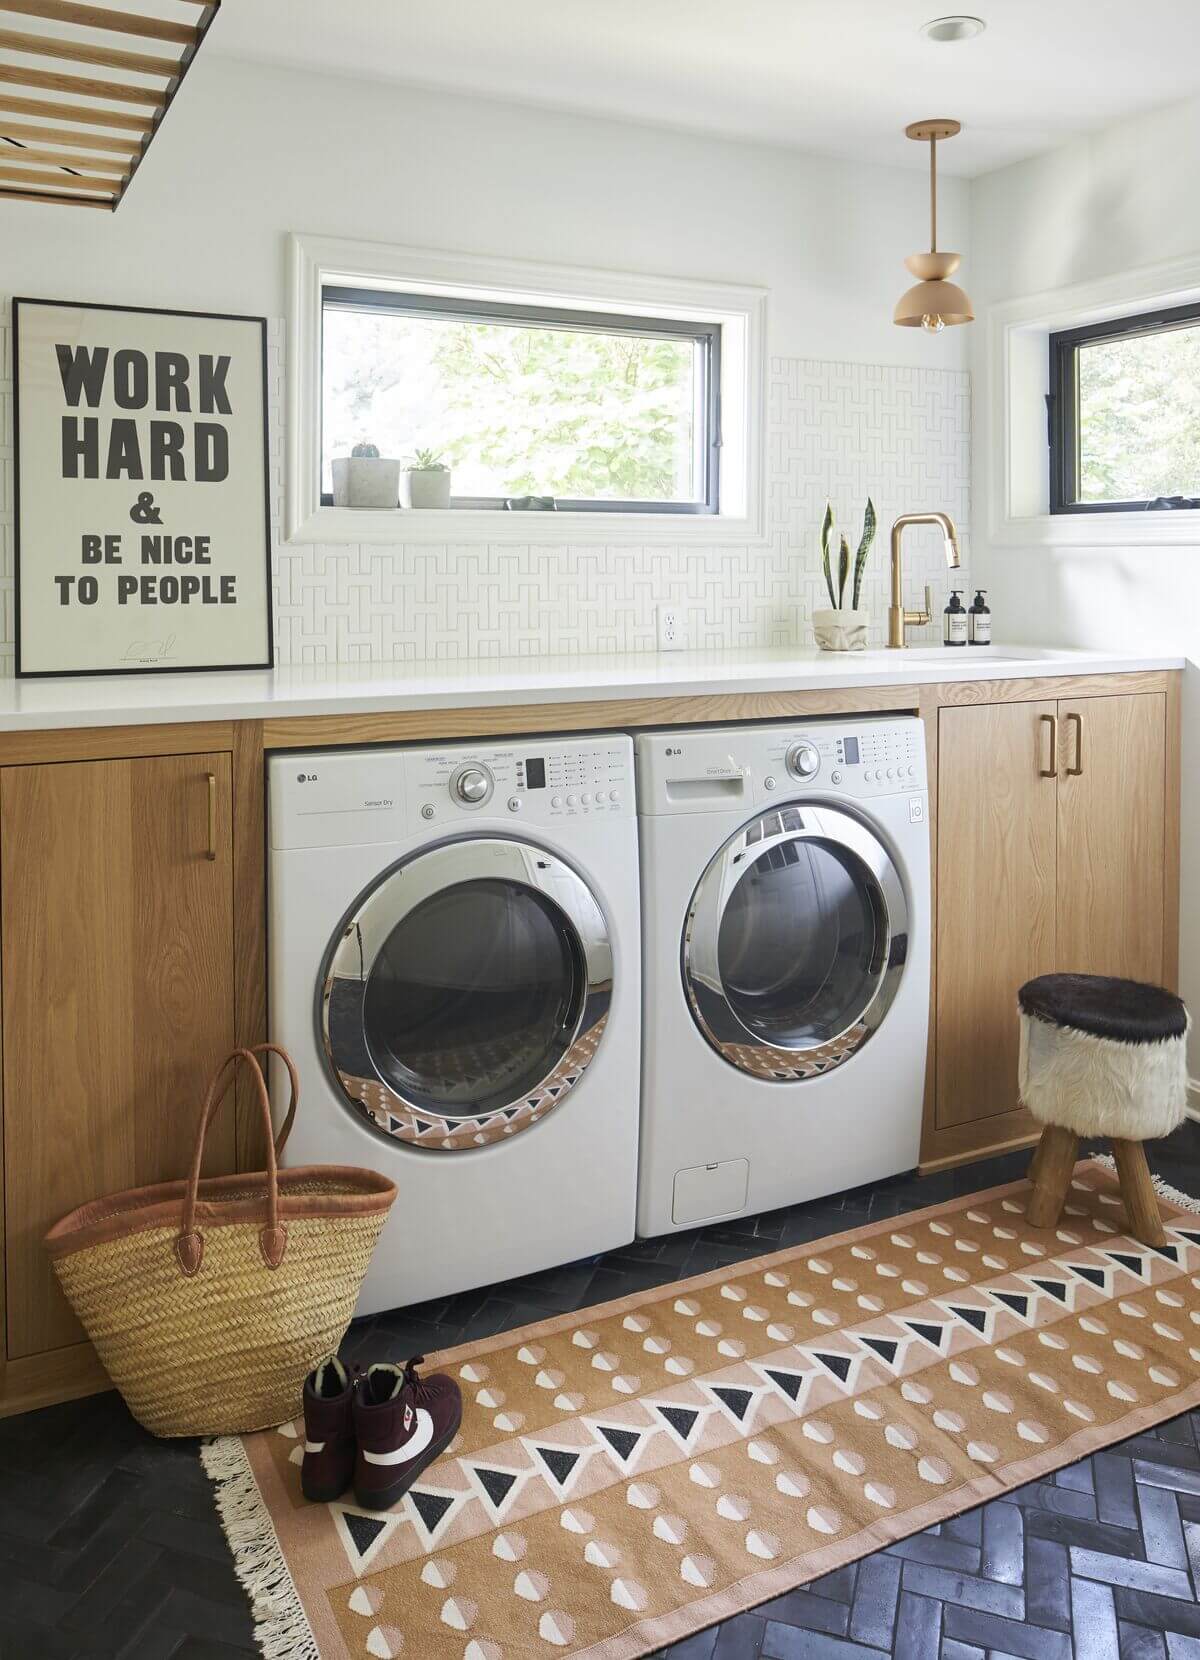 What We Want Right Now: A Lovely Laundry Room